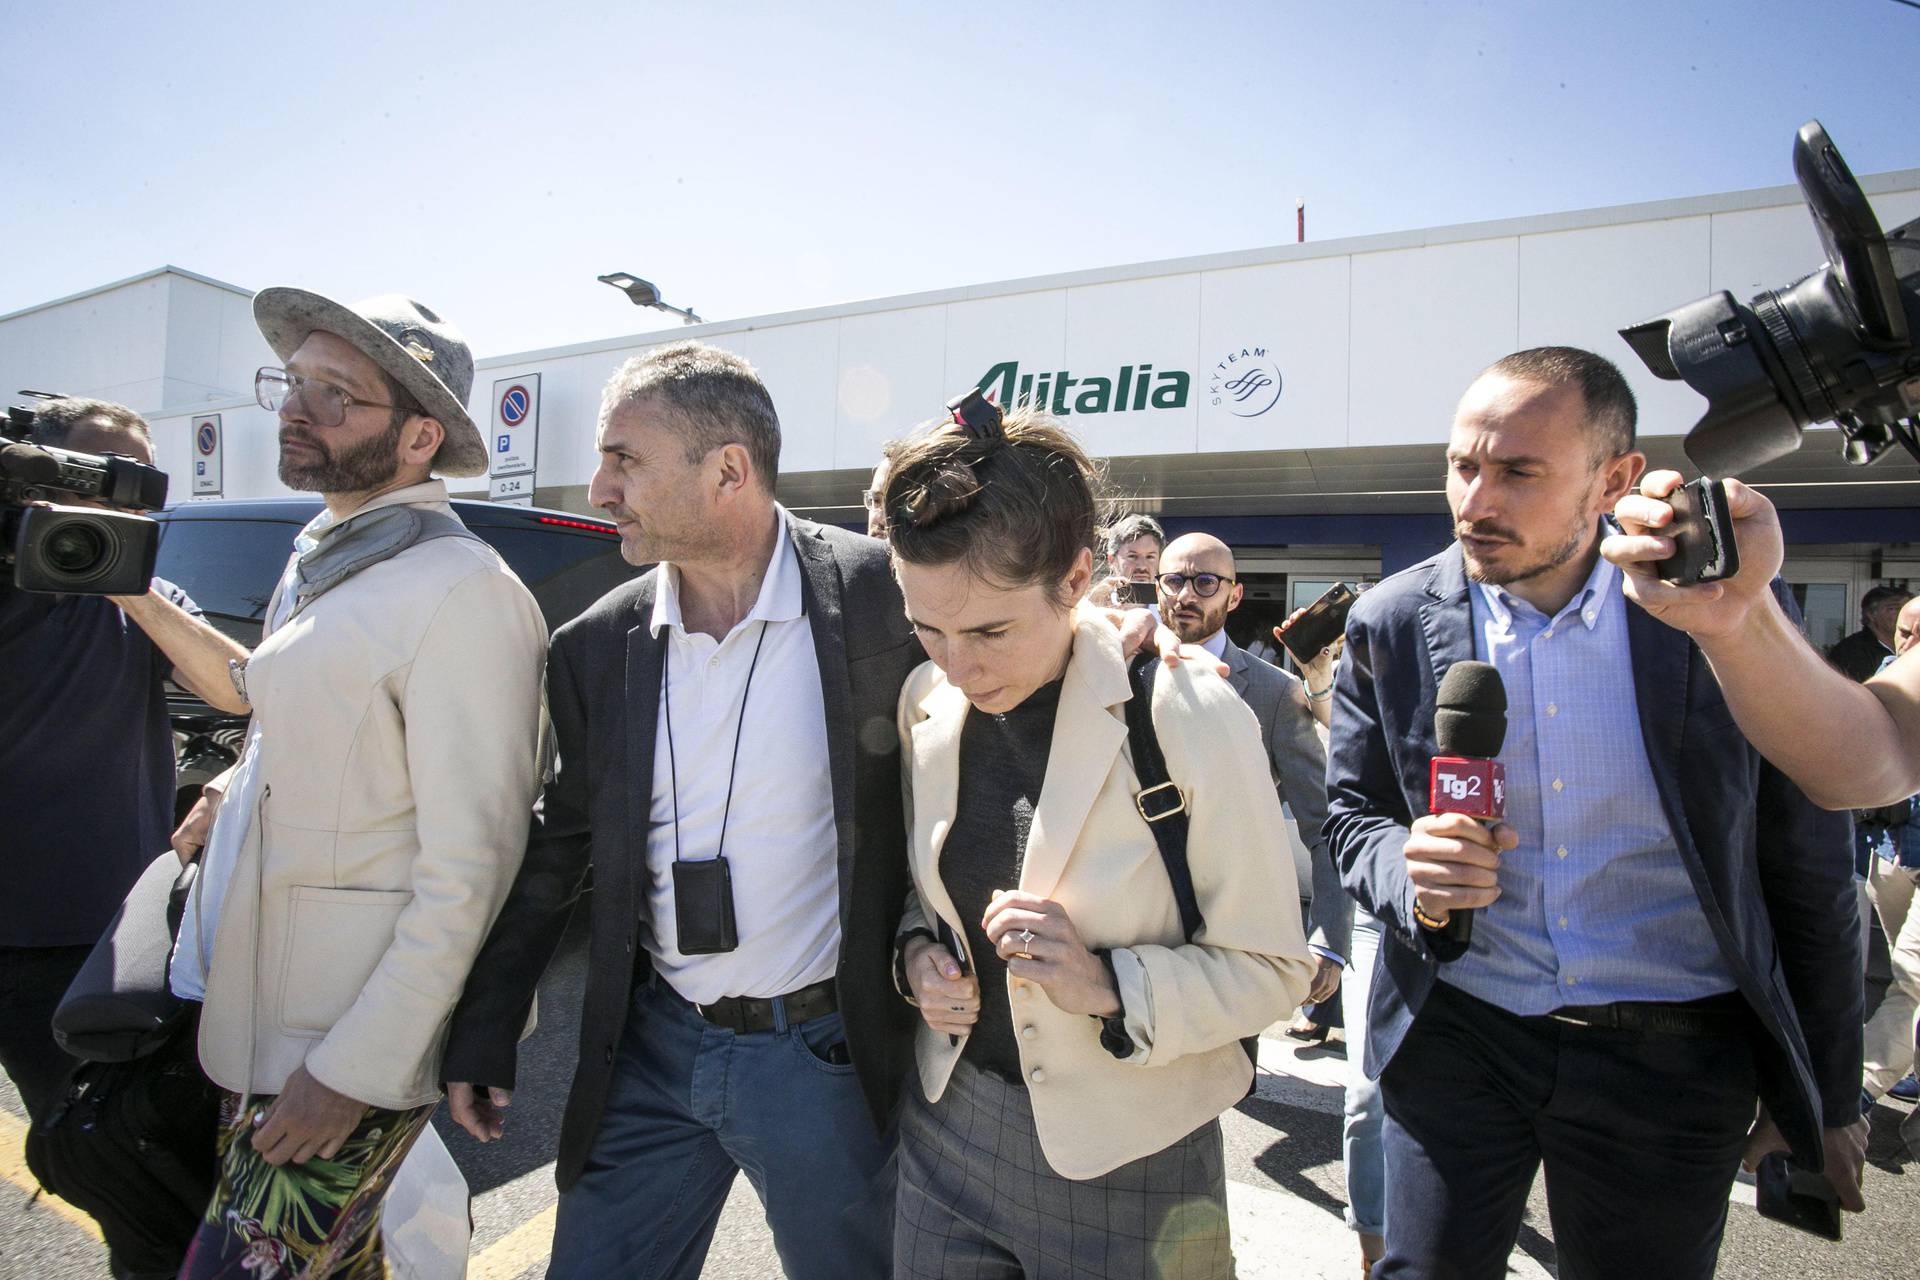 Arrival of Amanda Knox in Italy at Linate airport